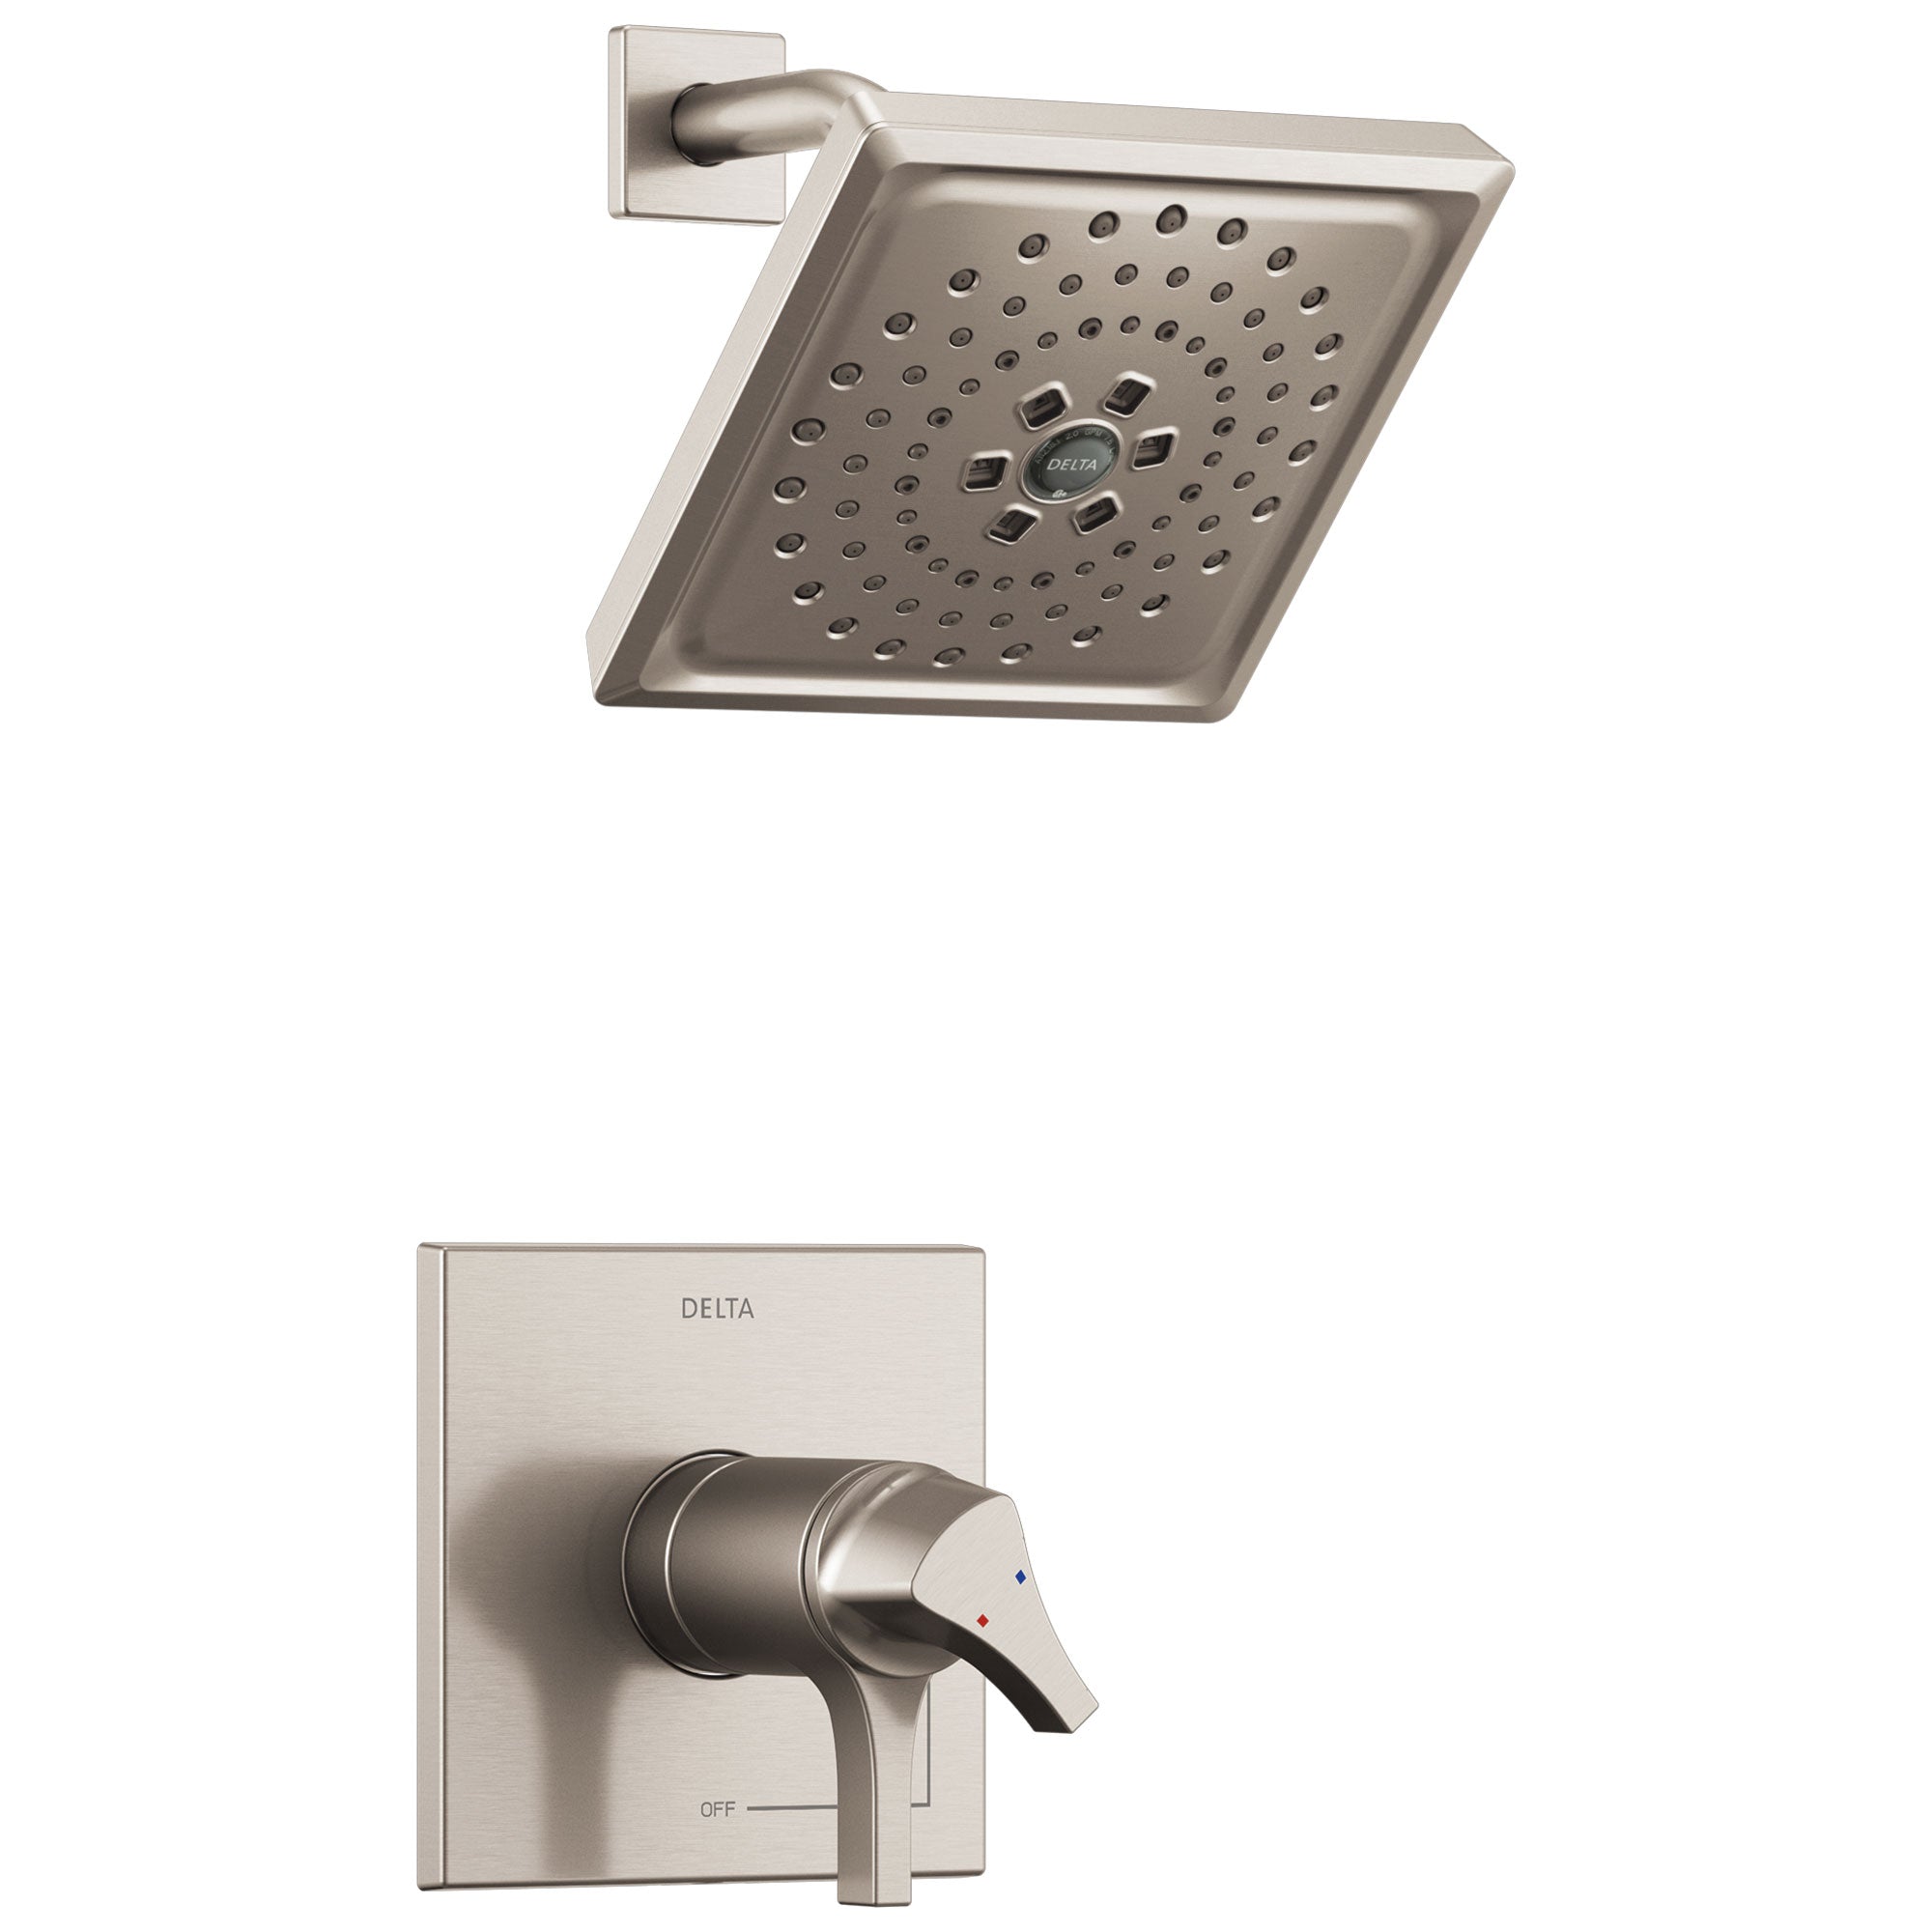 Delta Zura Collection Stainless Steel Finish TempAssure 17T Modern Dual Temperature and Volume Control Shower Faucet Includes Rough-in Valve without Stops D1930V